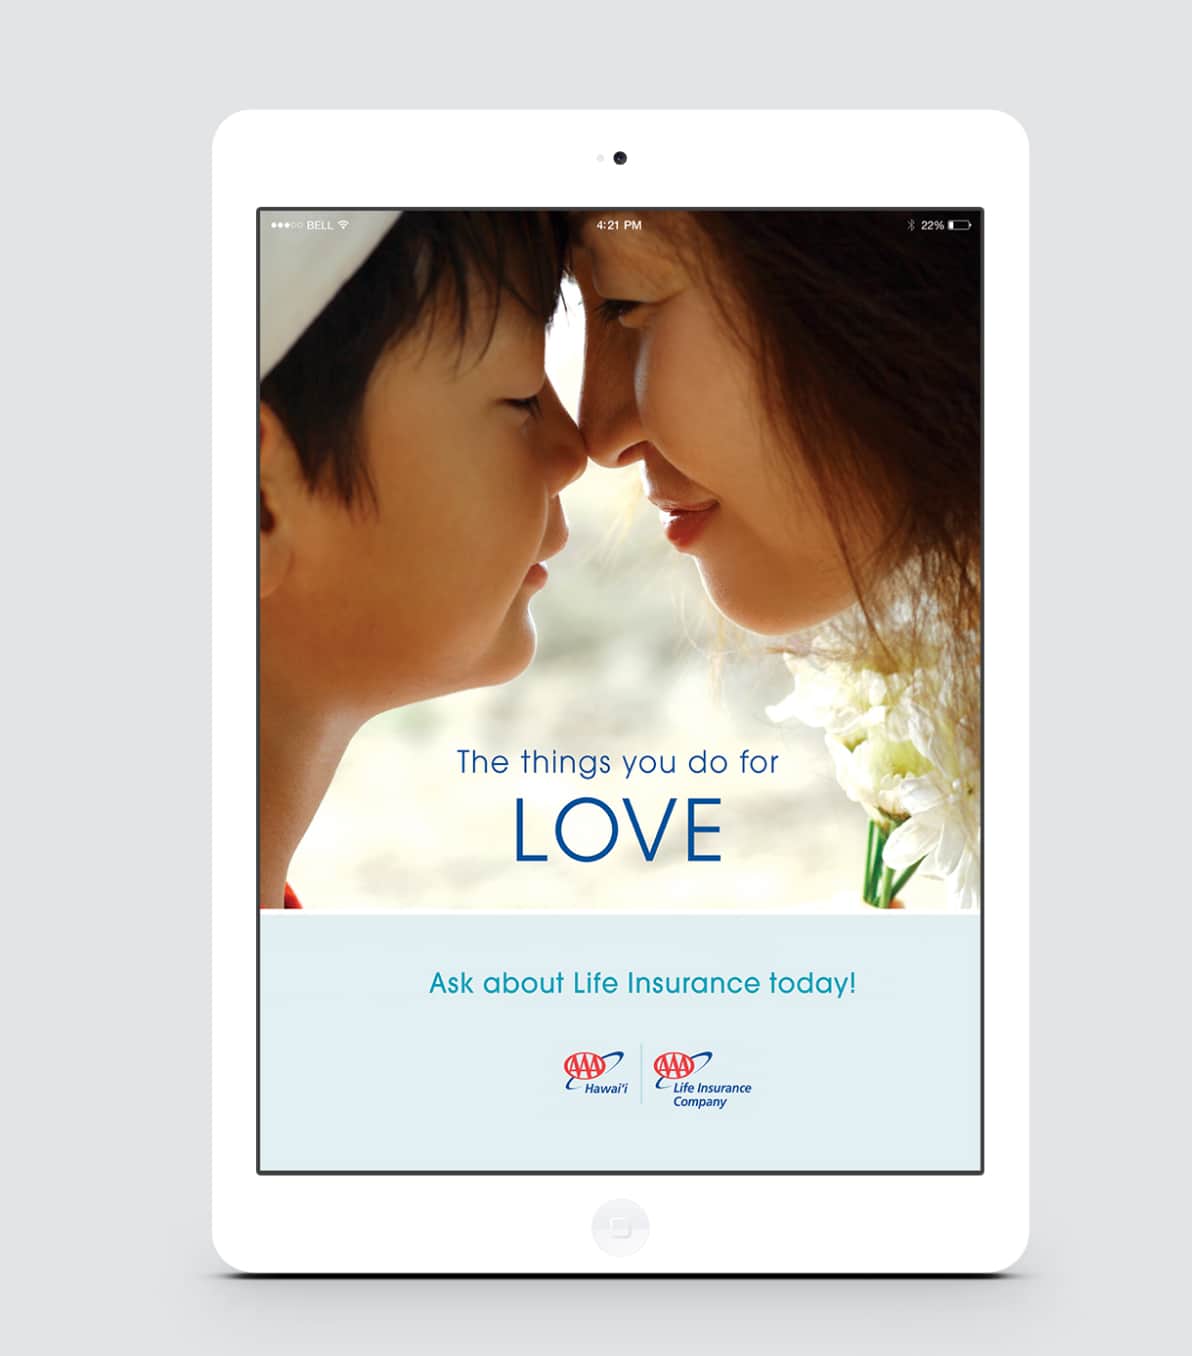 A digital tablet displaying an advertisement for life insurance with a close-up image of a mother and child affectionately touching noses, with a tagline about love.